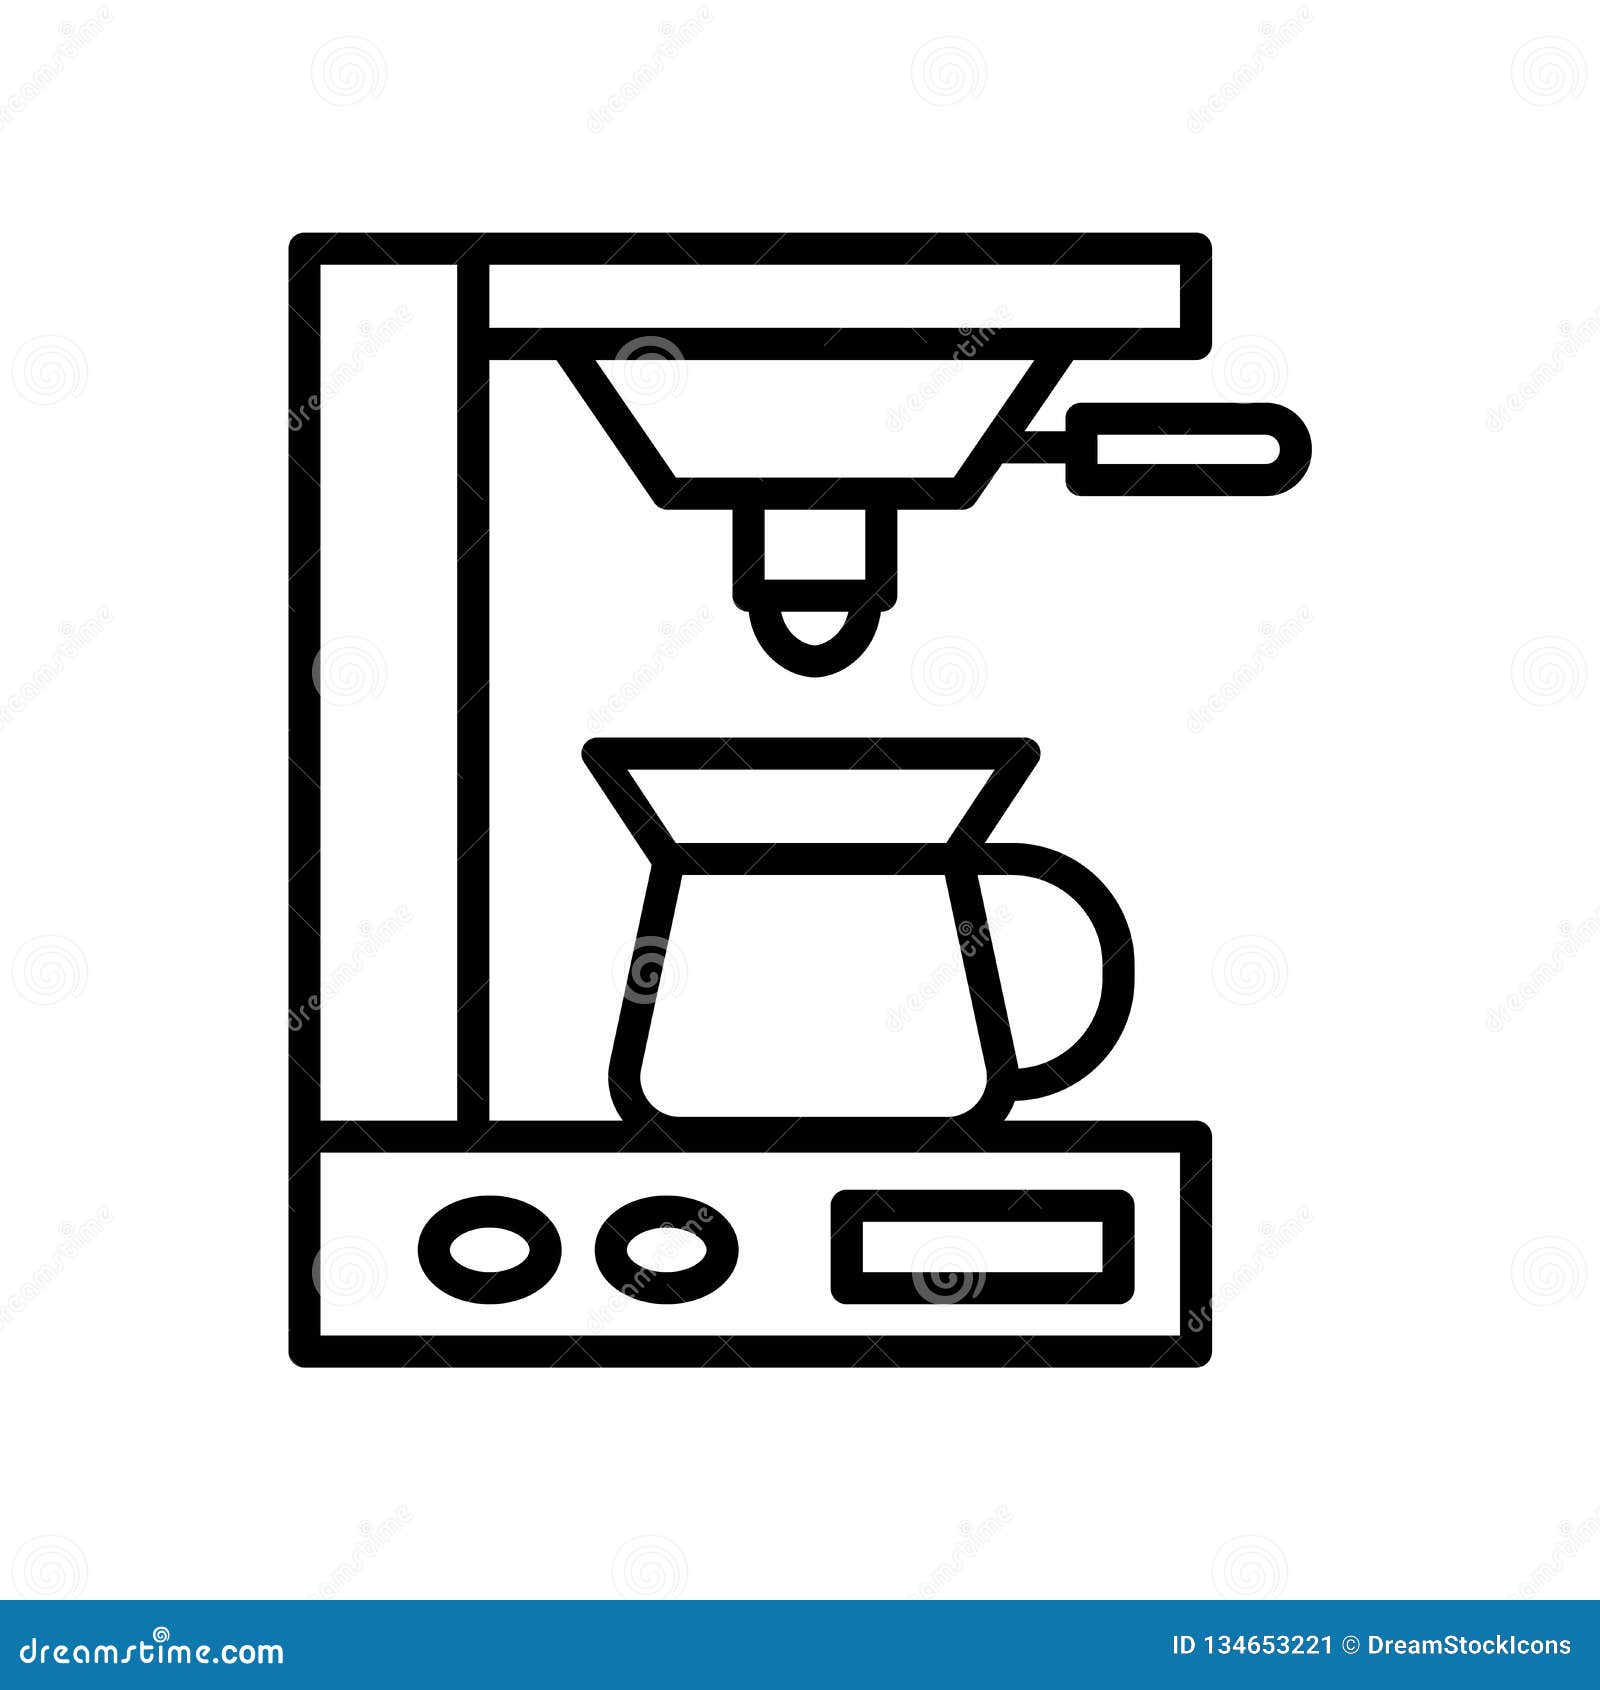 Coffee Maker Icon Vector Isolated on White Background, Coffee Maker Sign ,  Line or Linear Sign, Element Design in Outline Style Stock Vector -  Illustration of chemex, cappuccino: 134653221